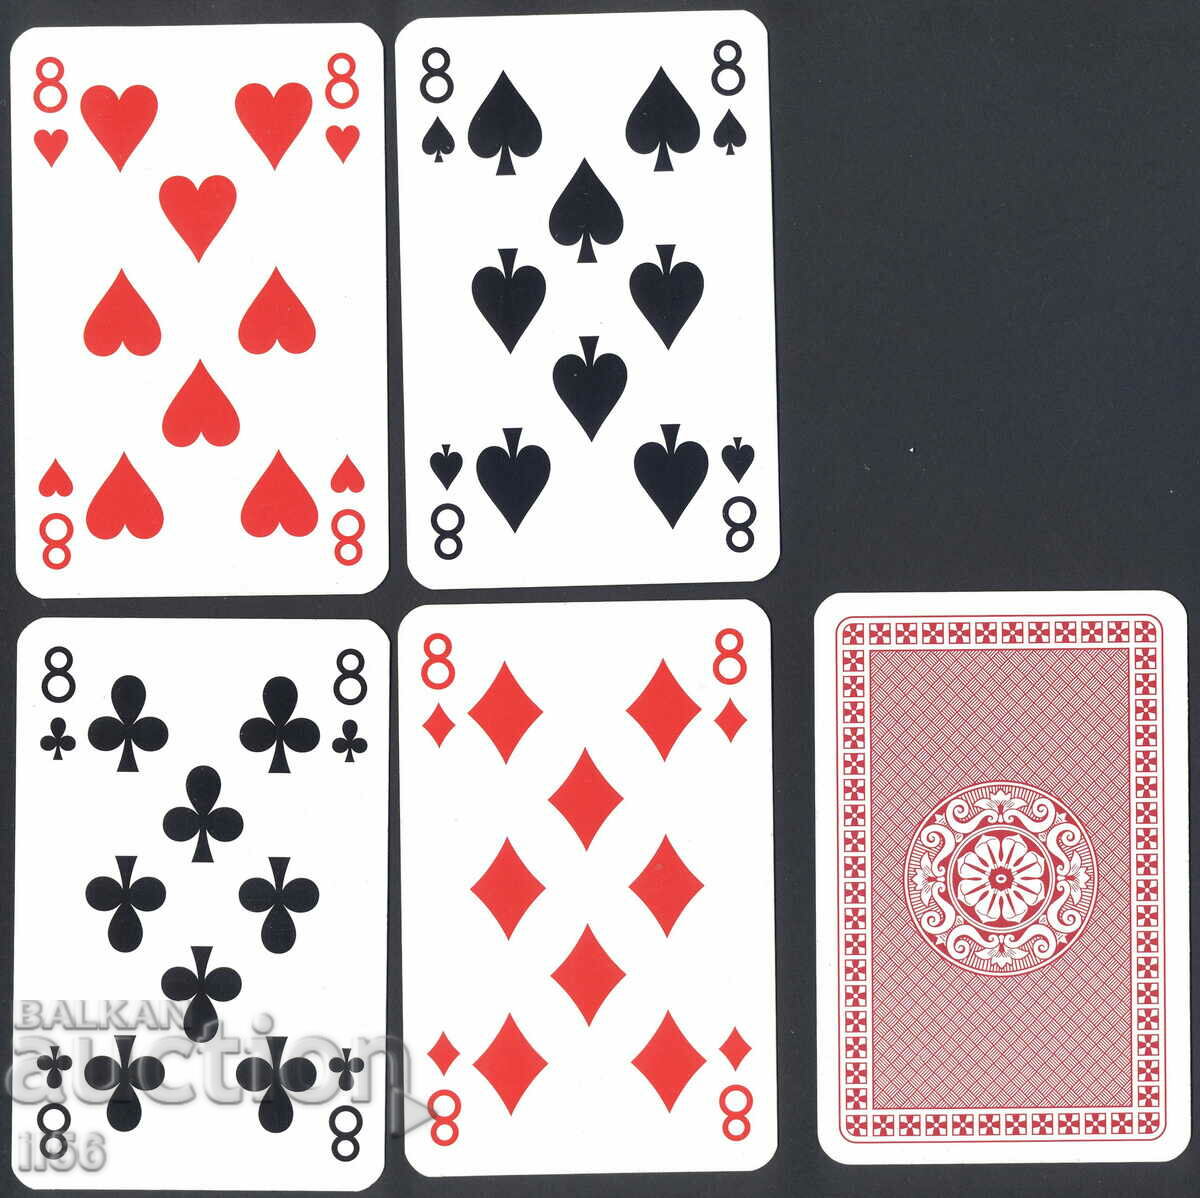 Playing cards - poker - square eights